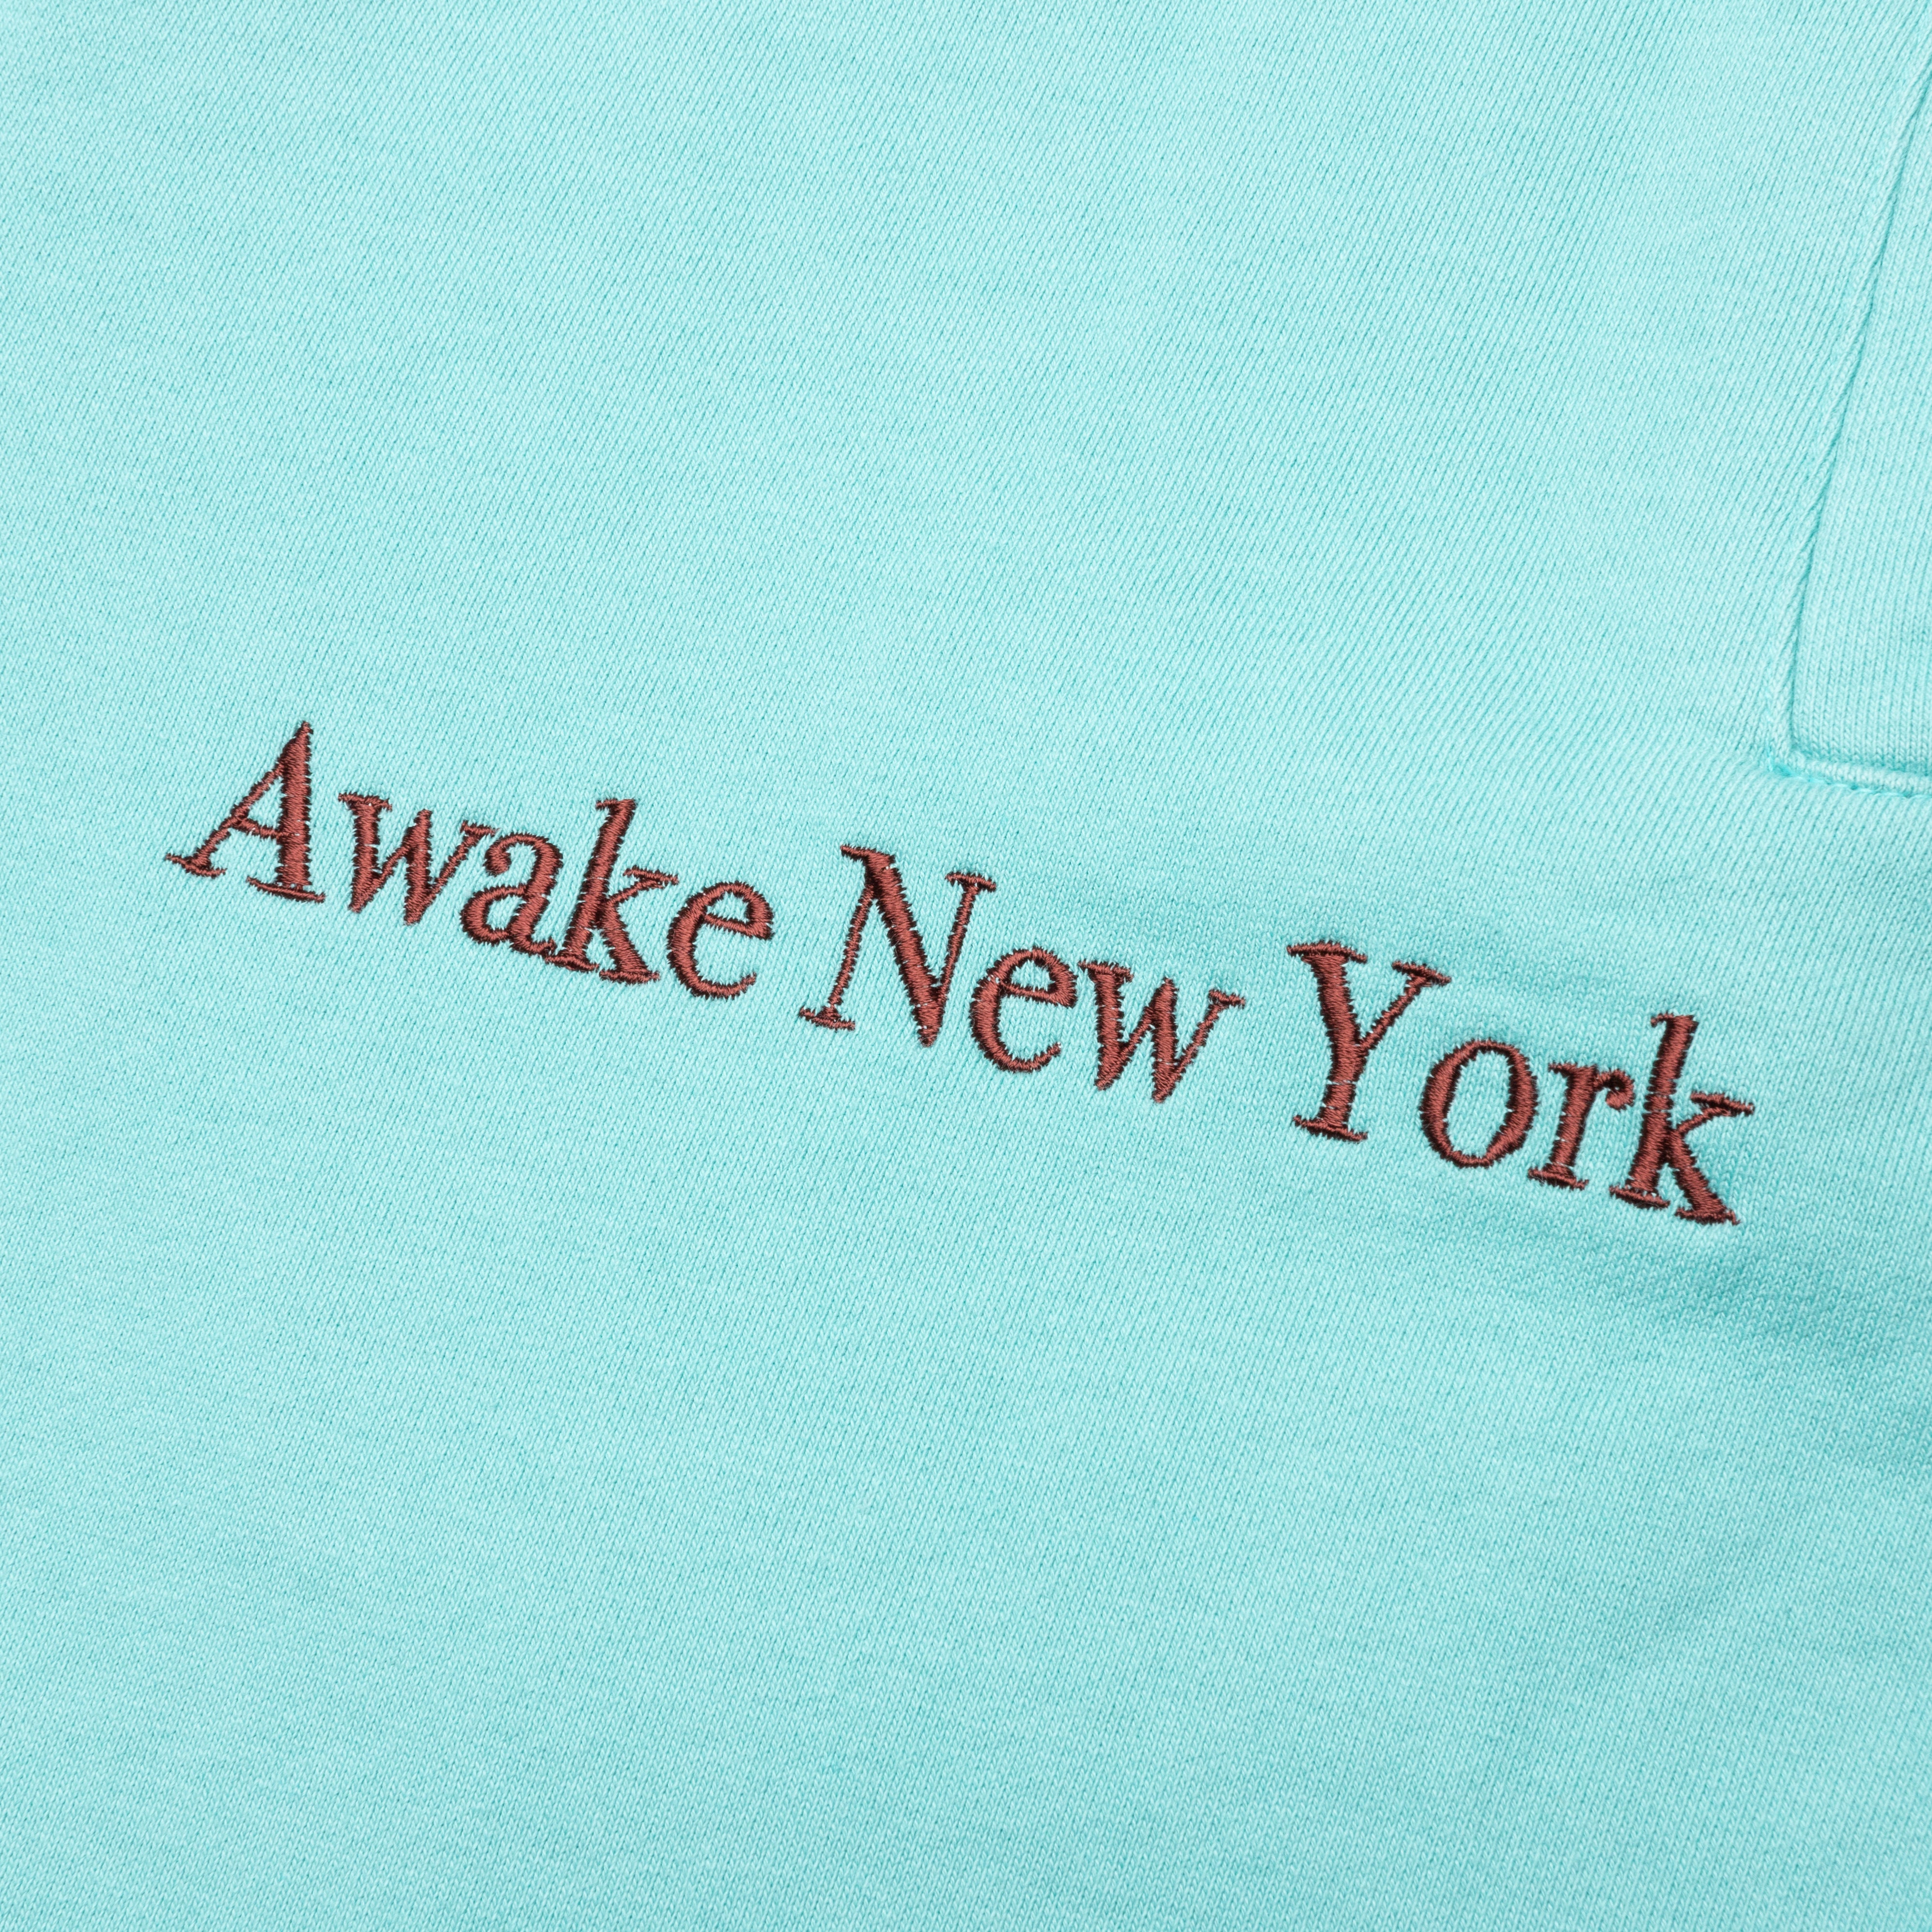 Awake Classic Outline Logo Paneled Embroidered Sweatpants - Teal, , large image number null